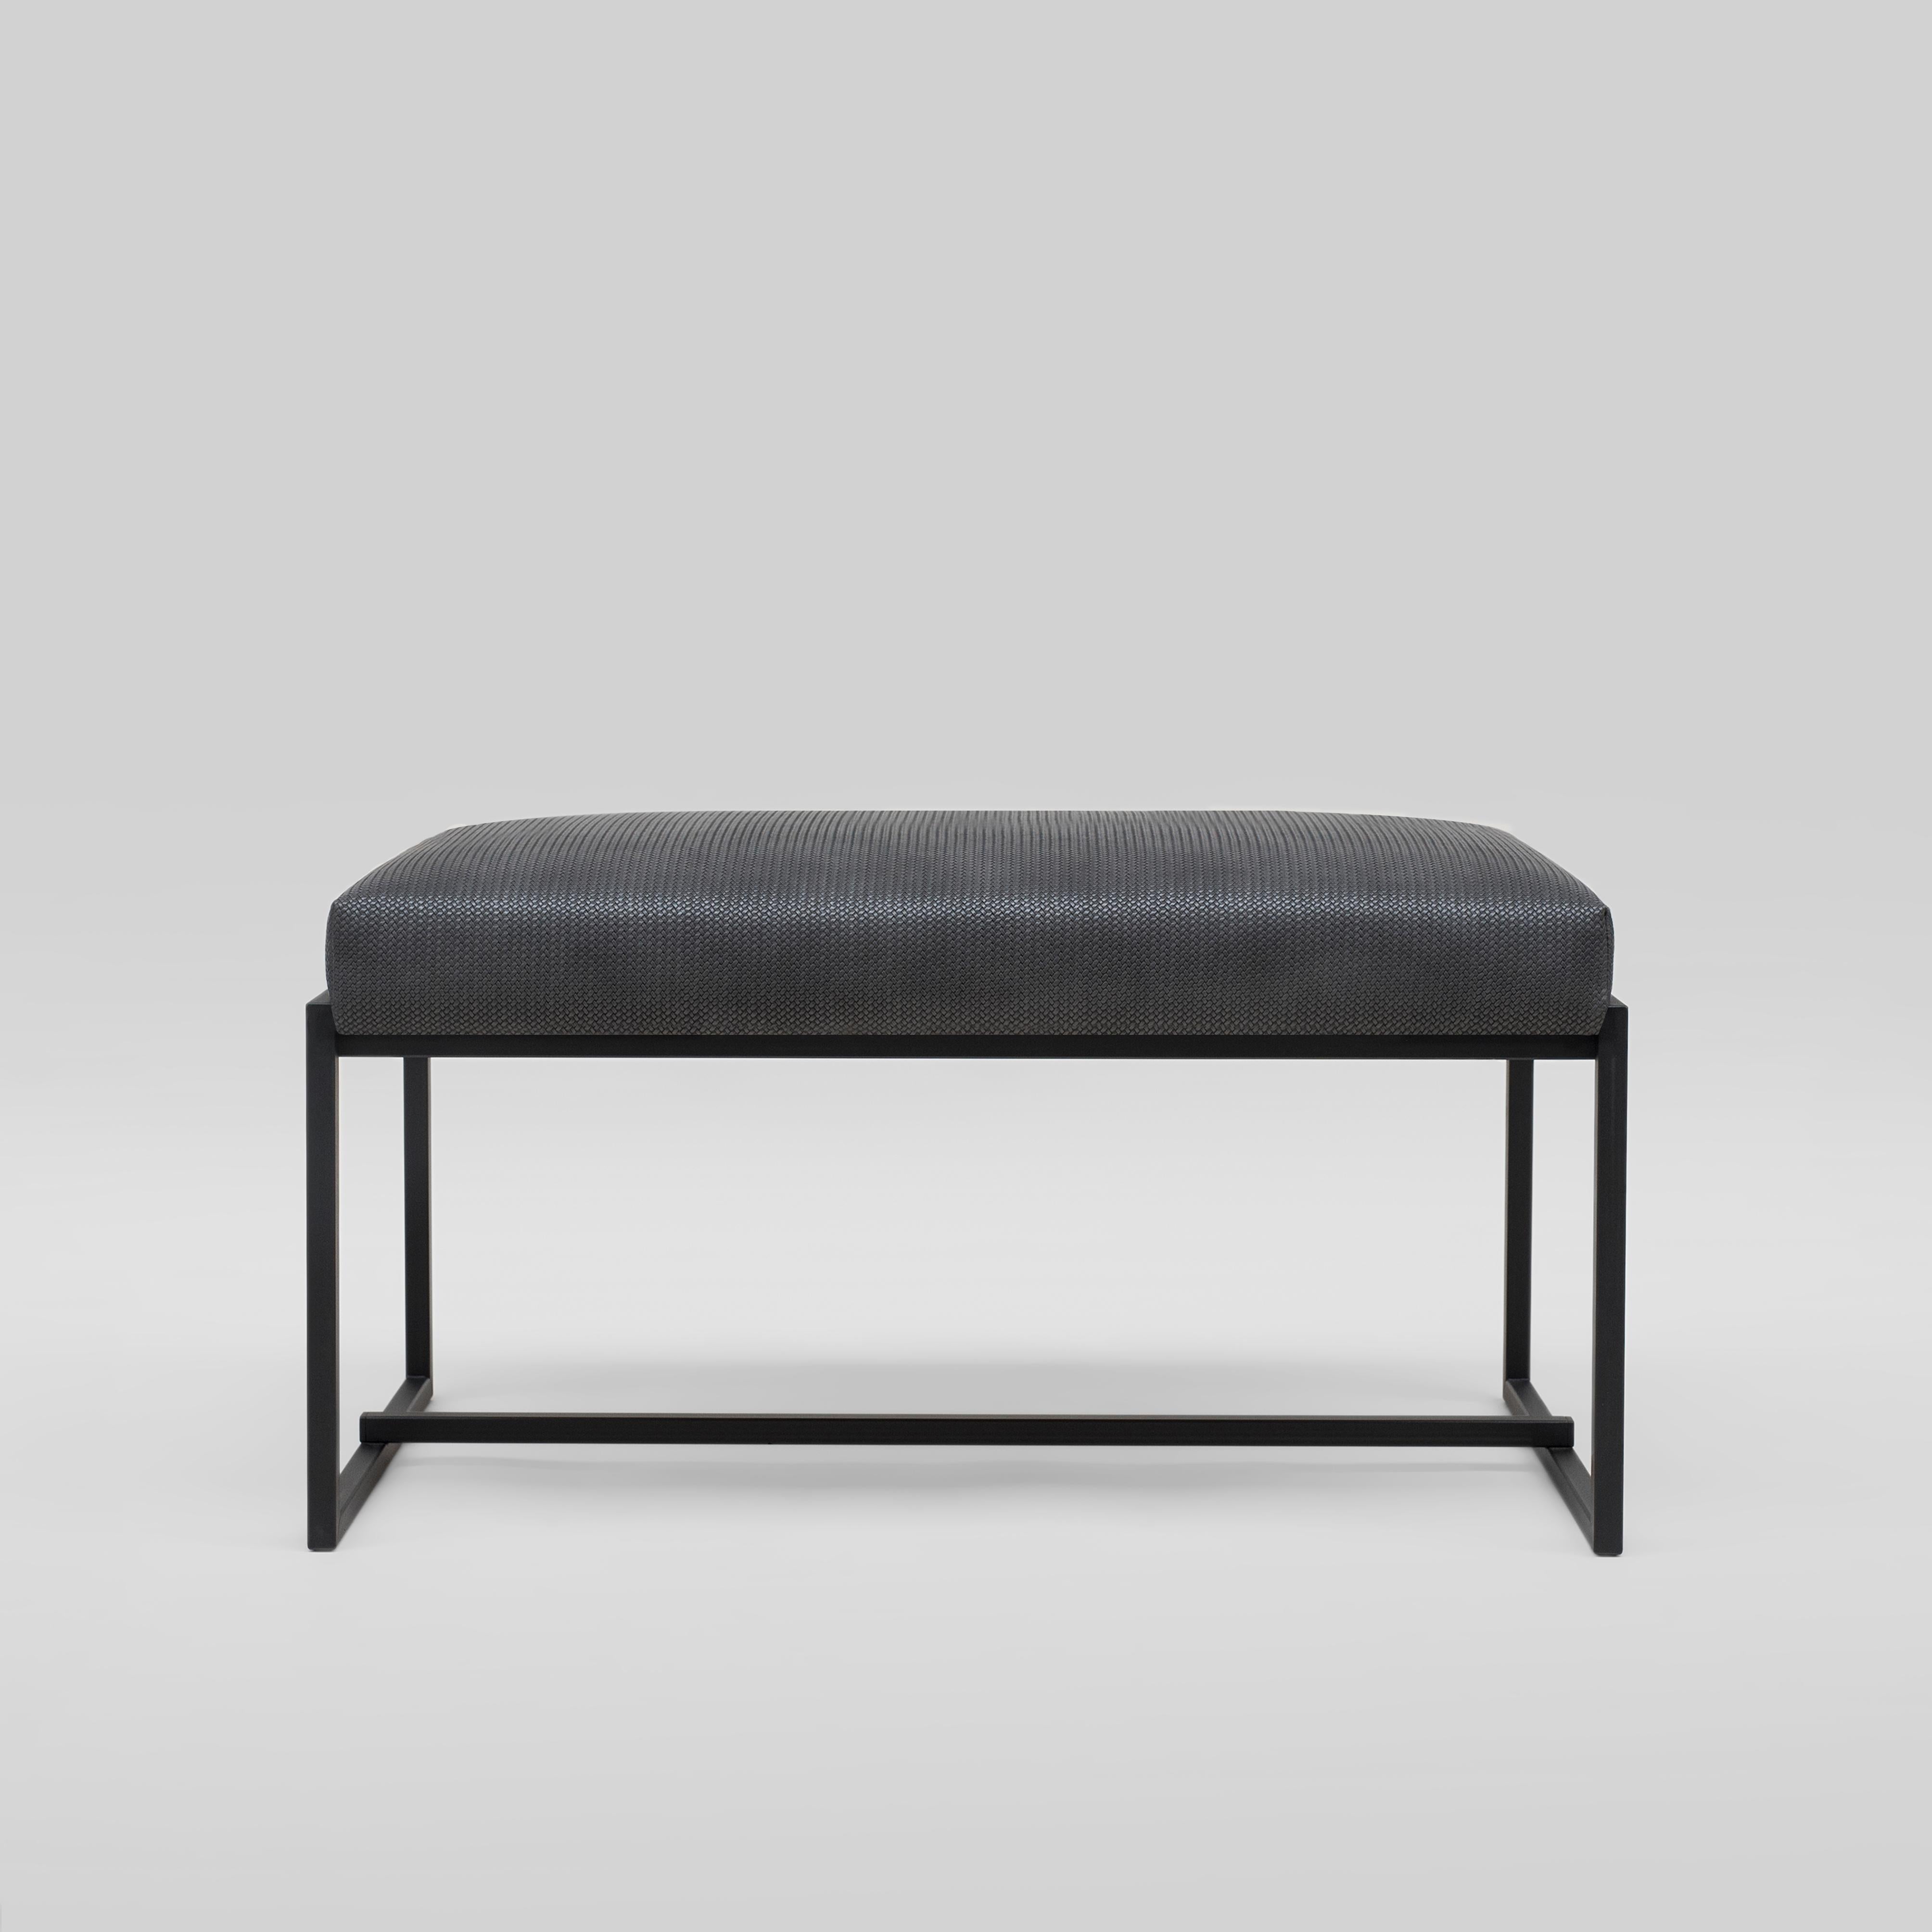 Minimalist Peter Ghyzcy Bench Urban Grace GB03 Charcoal Frame and Details Leather Look